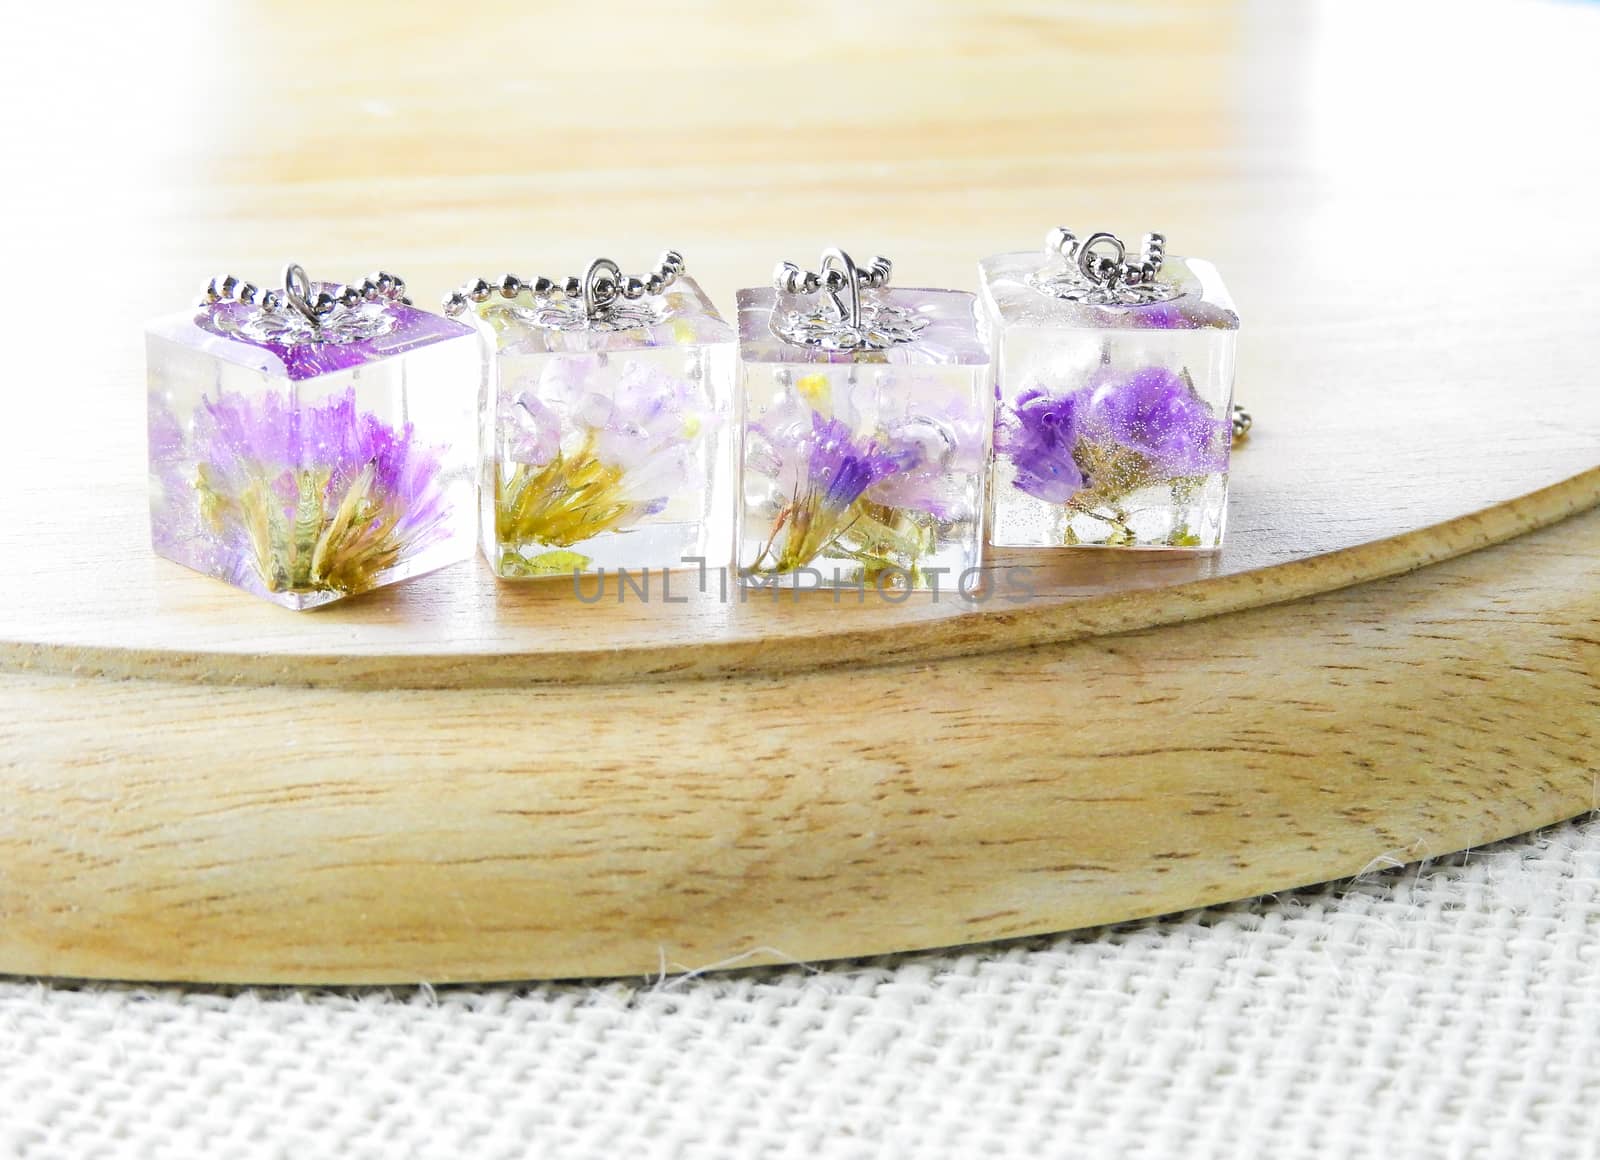 Dried flower in crystal clear resin pendant necklace, pendant wi by yuiyuize